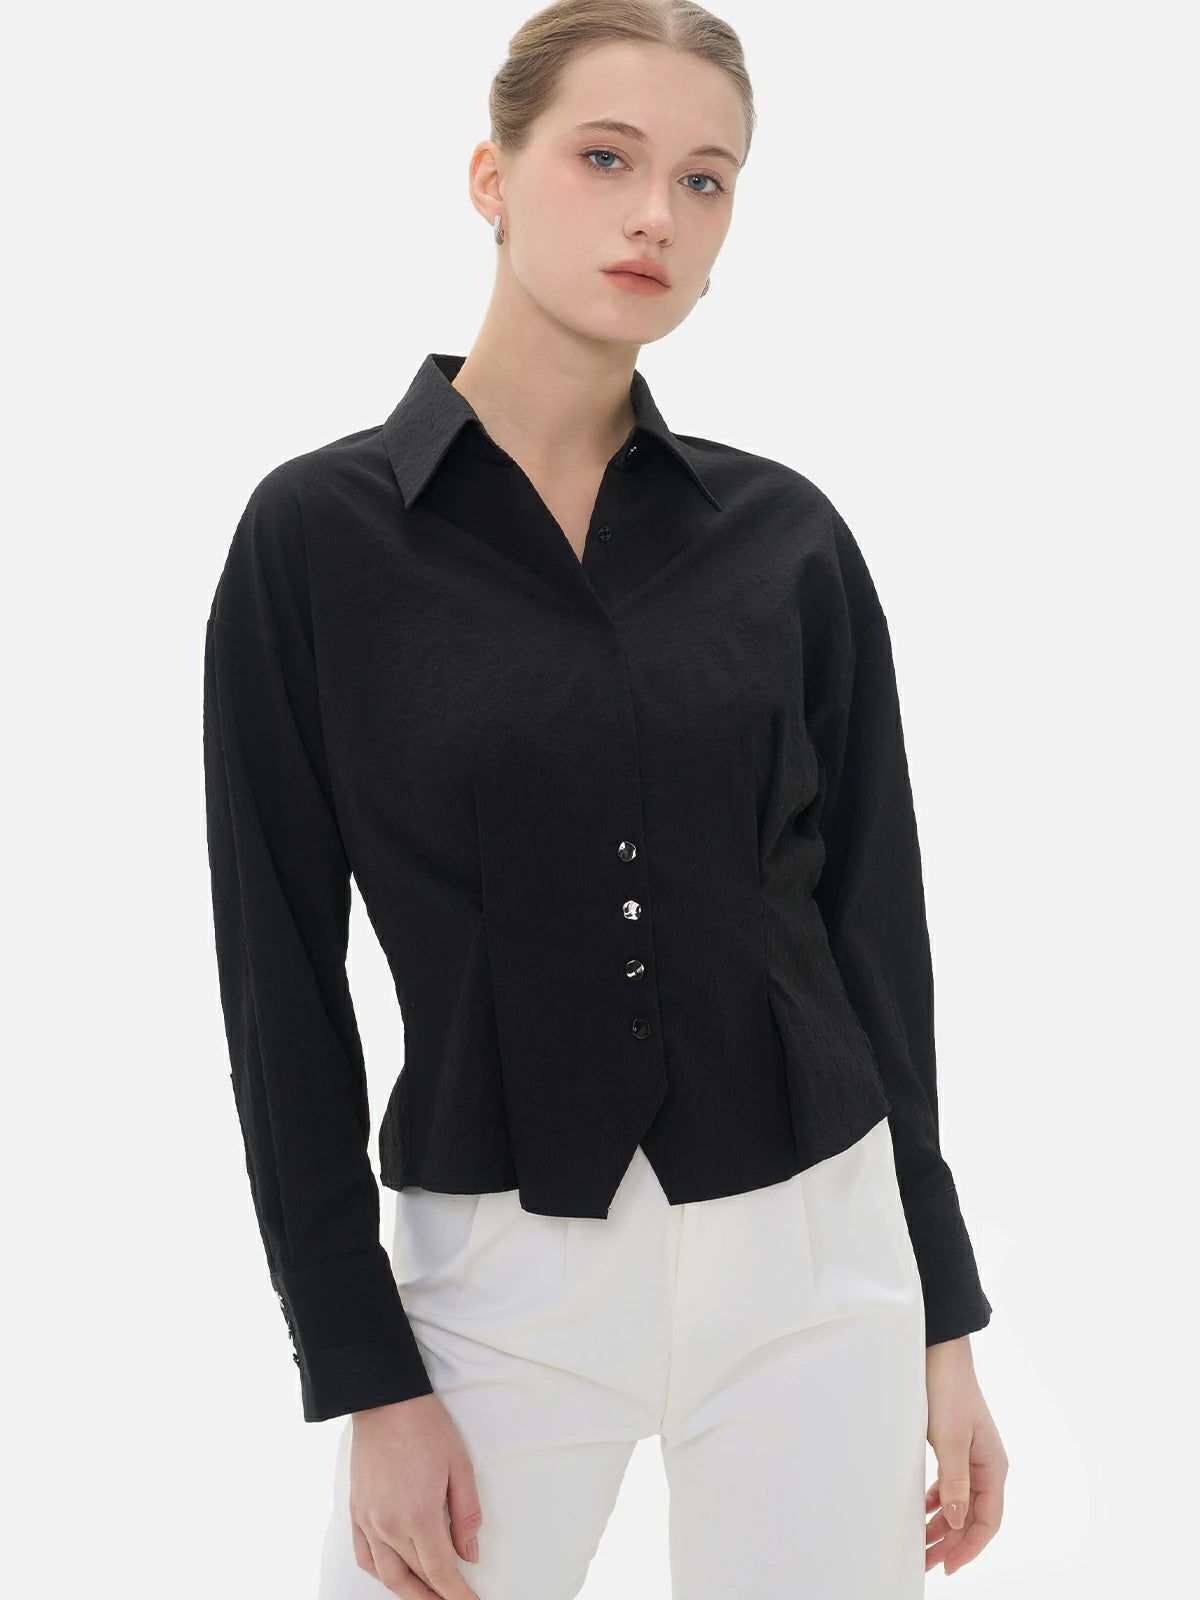 Stylish black collared shirt with textured surface for a unique look